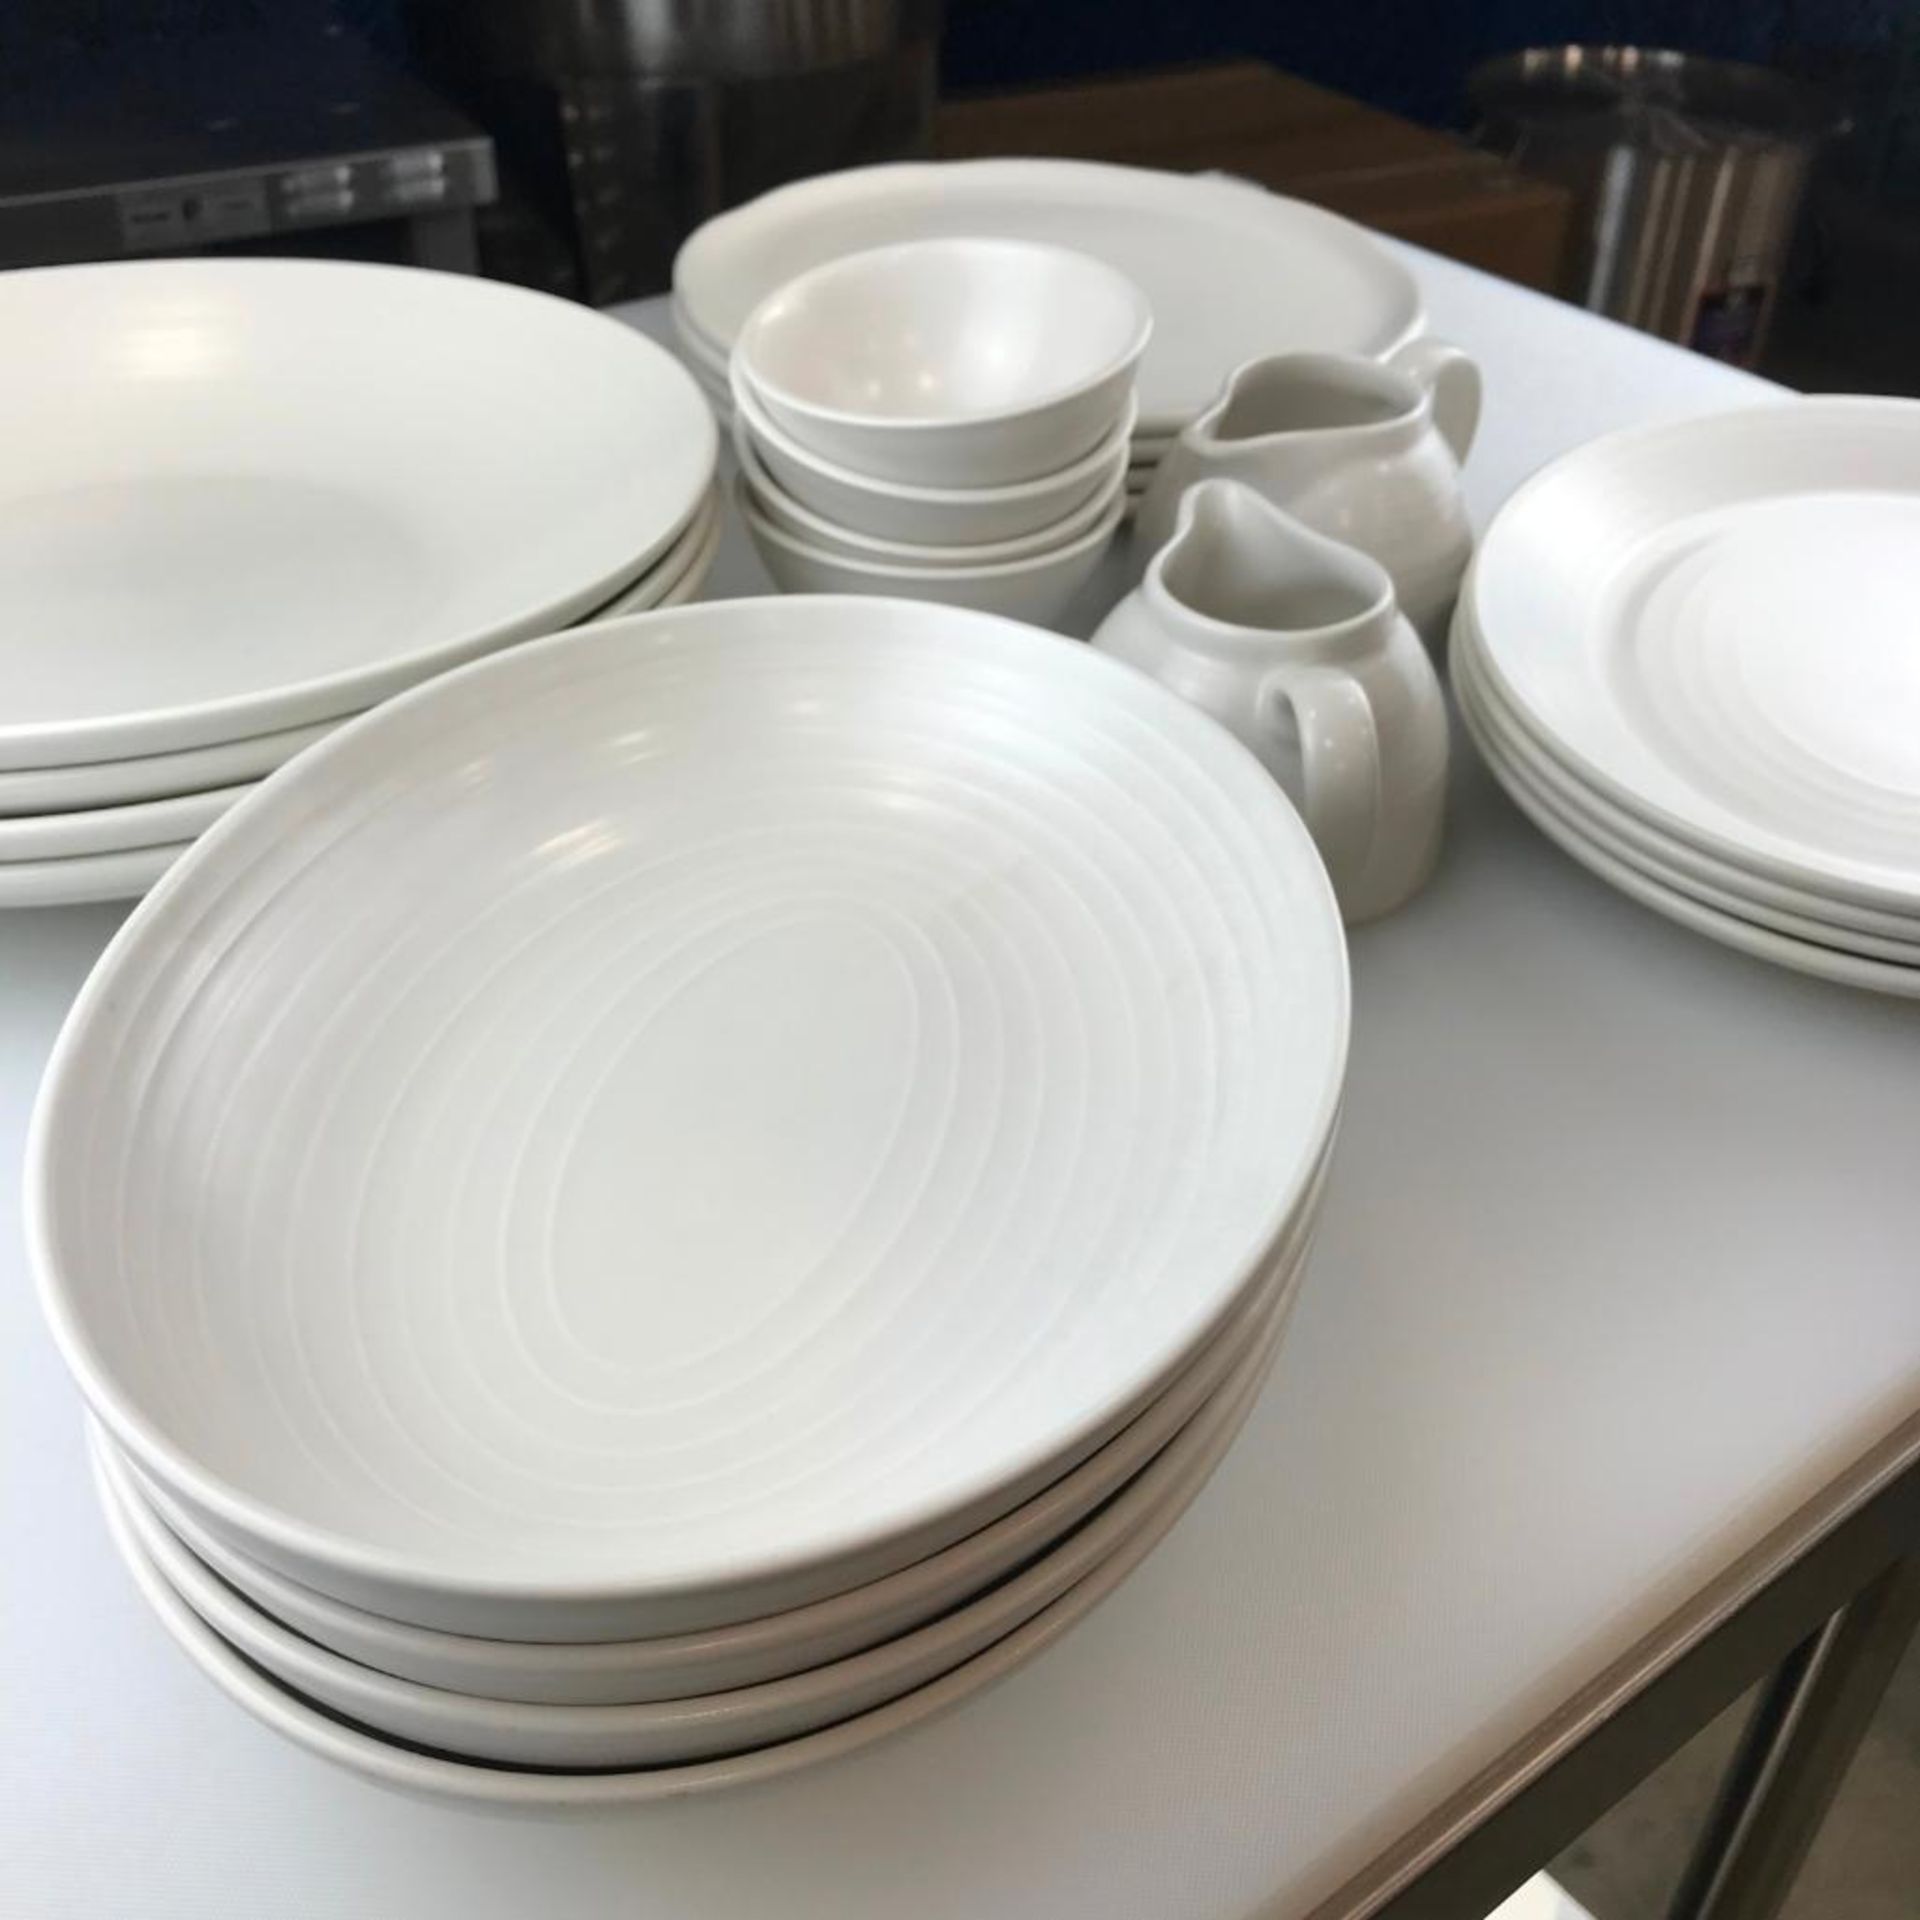 22 PIECE DUDSON EVO PEARL DINNERWARE SET, MADE IN ENGLAND - Image 3 of 8